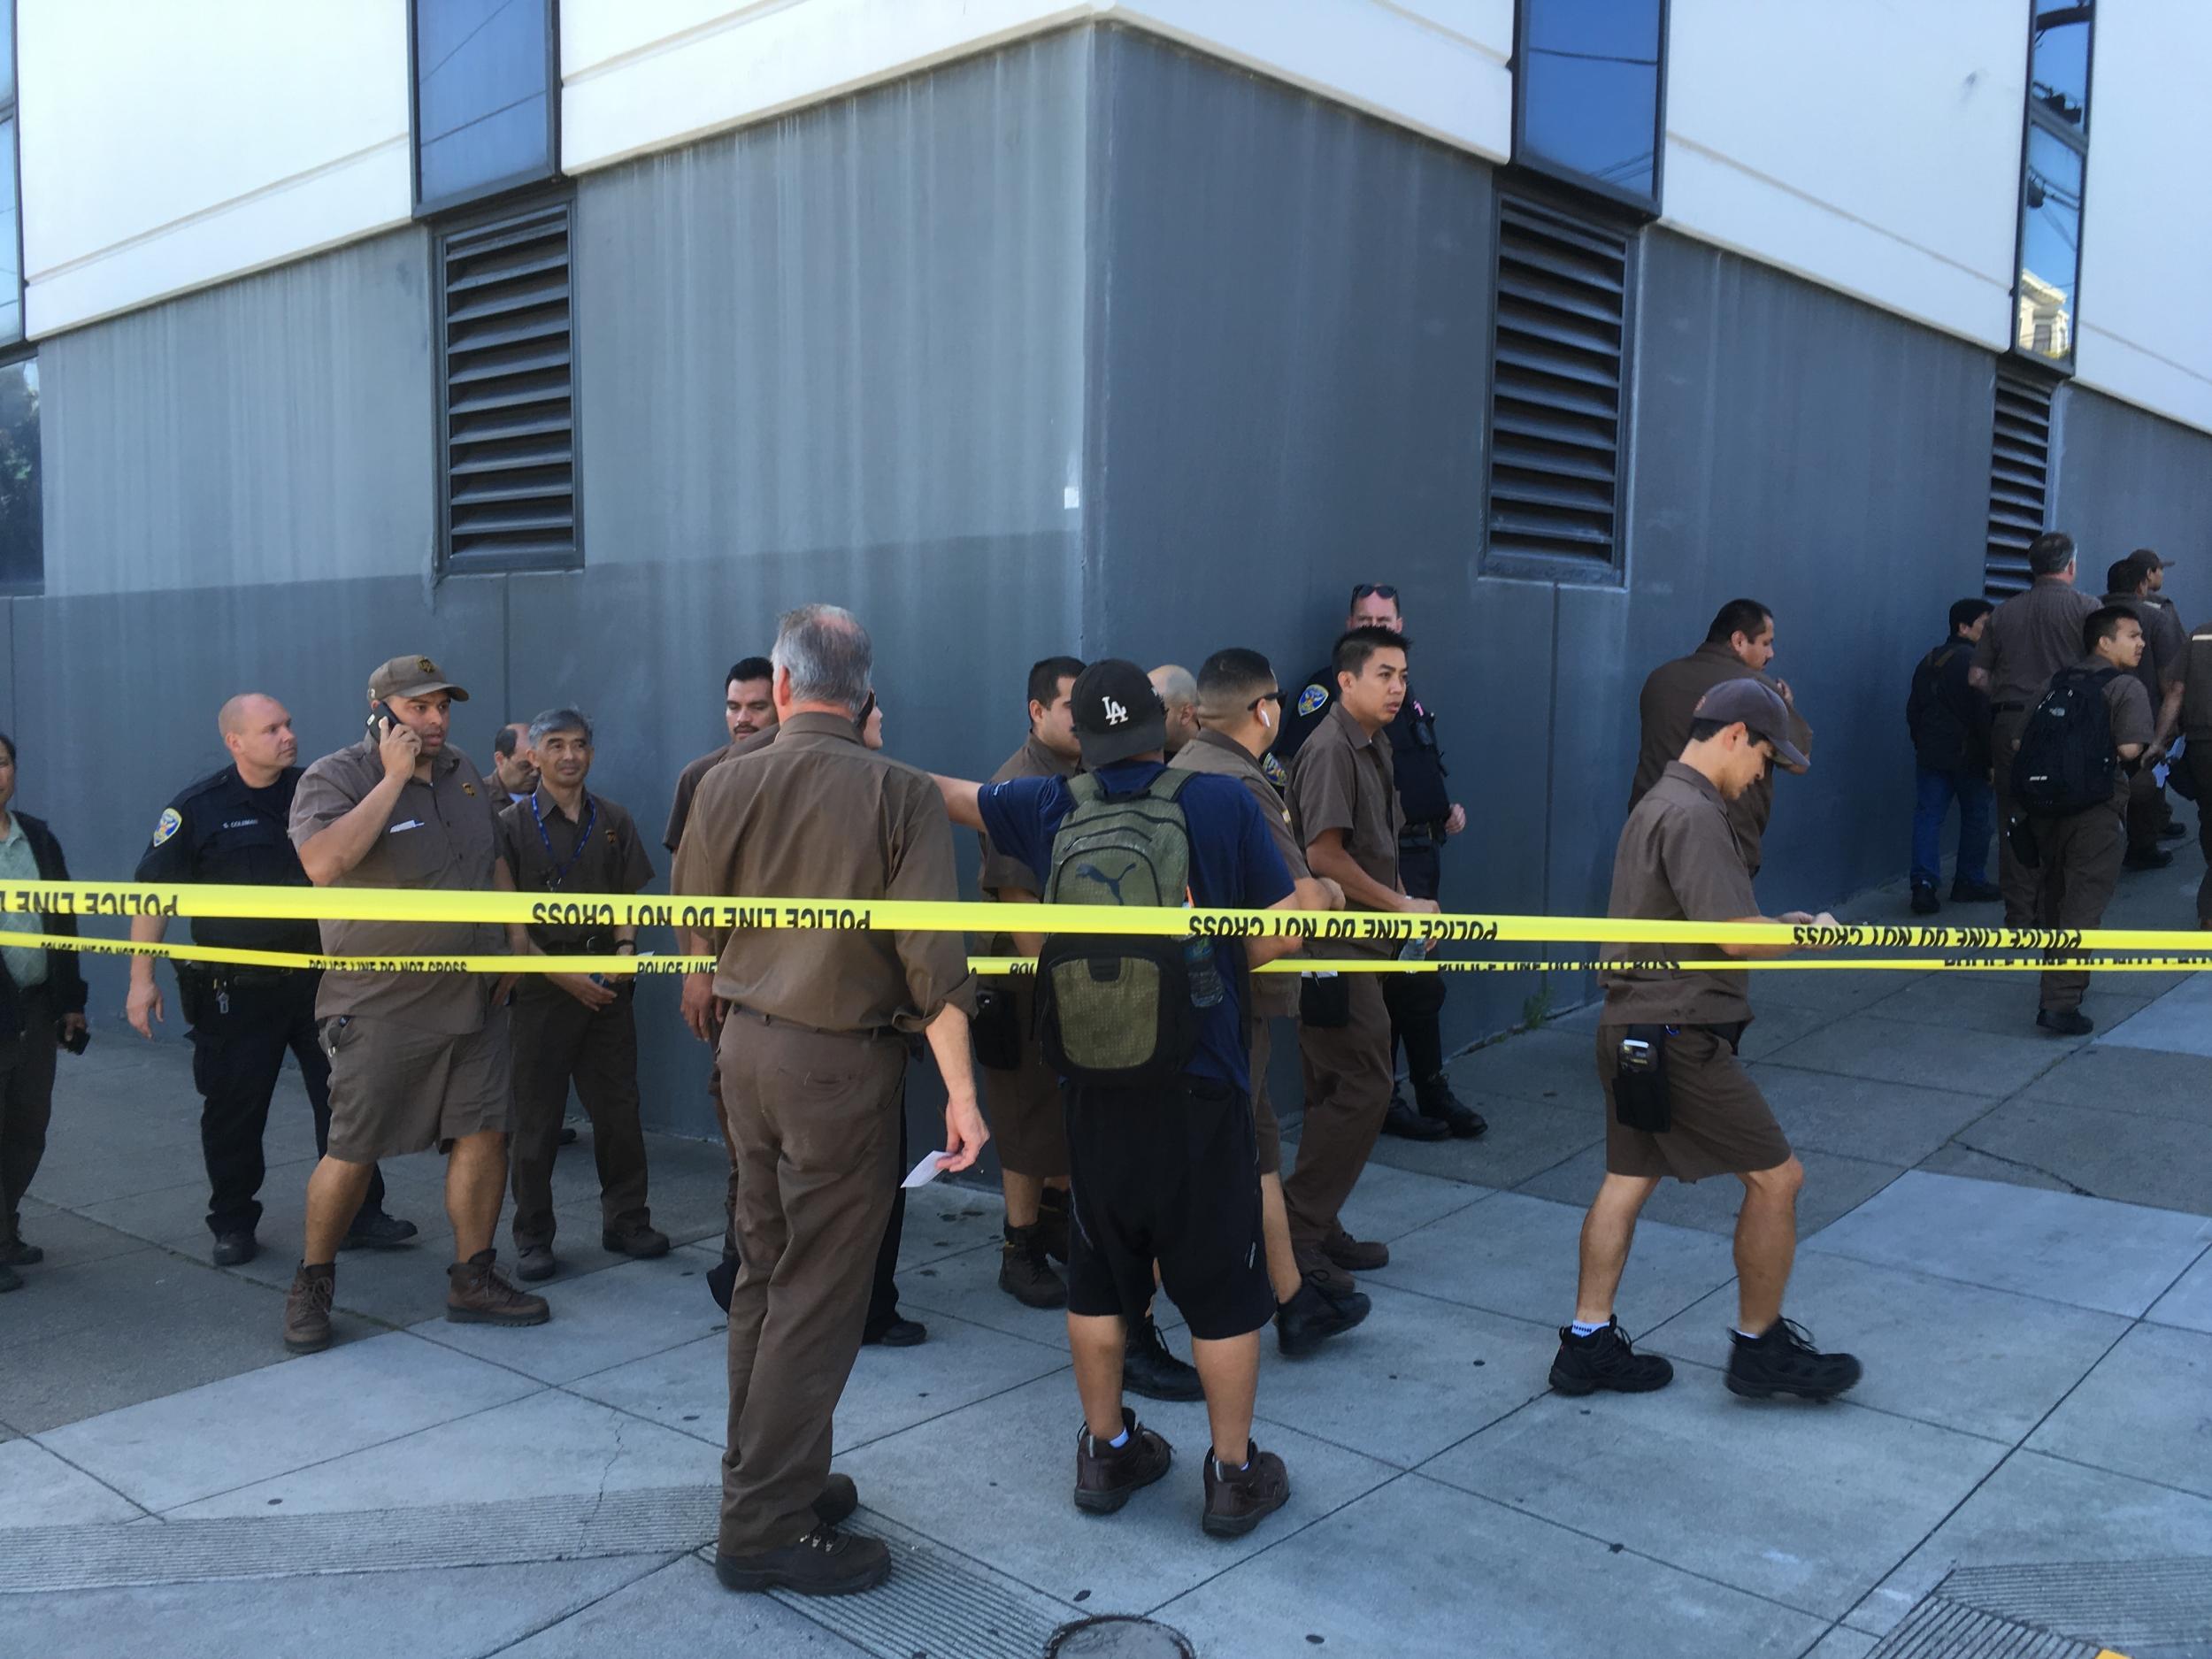 Police swarmed the neighborhood around a UPS in San Francisco after a man shot and injured several people